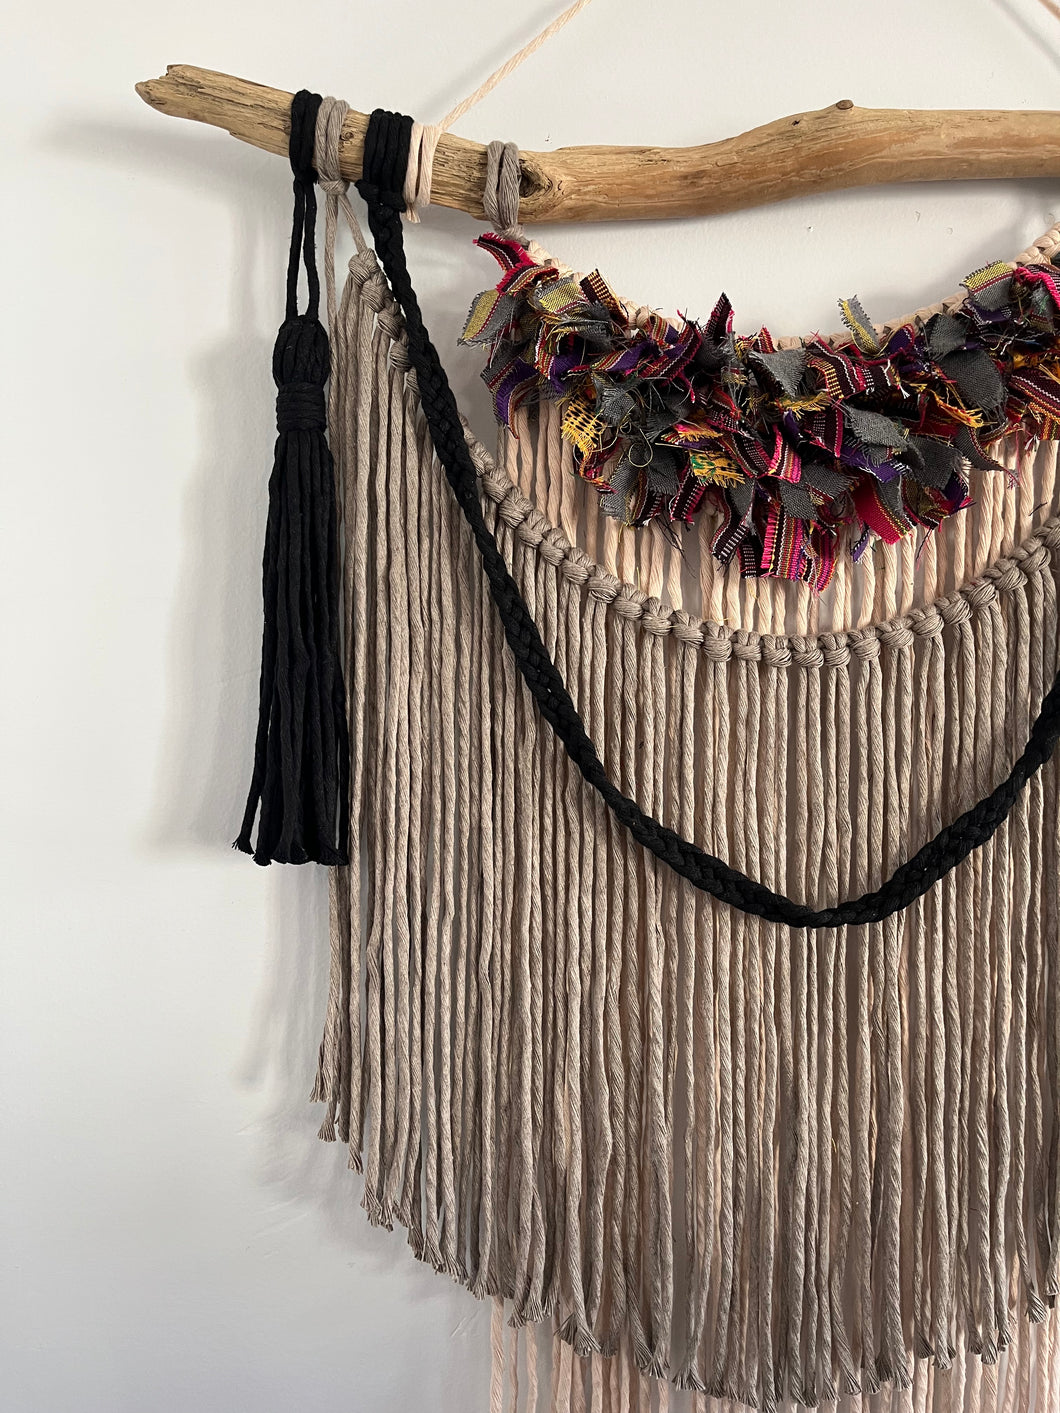 LEONOR (or, Flowers for Nanay) - Macramé Wall Hanging